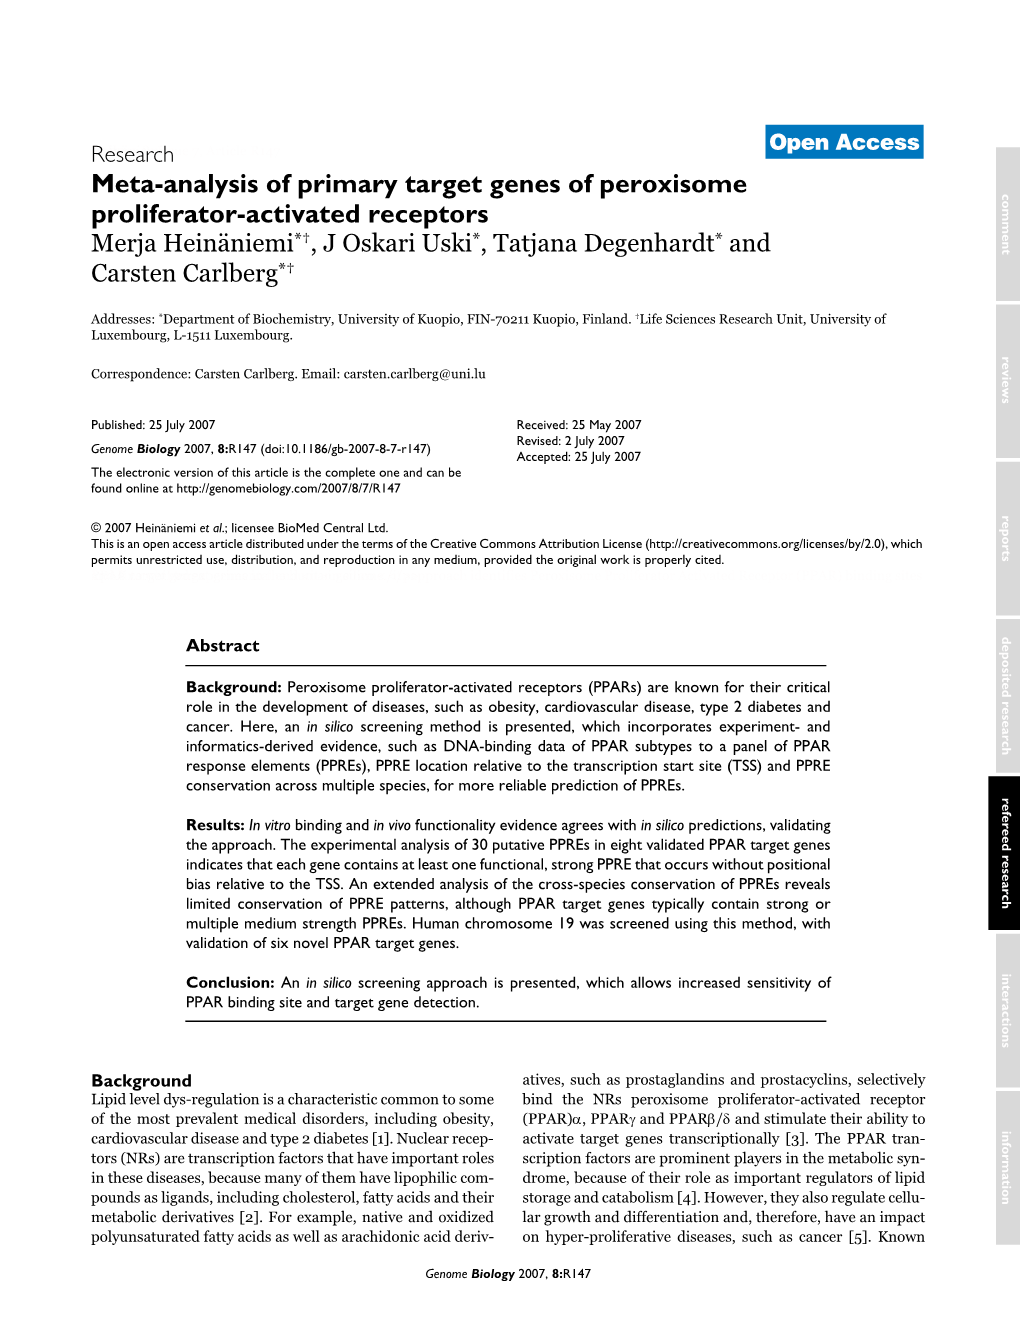 Meta-Analysis of Primary Target Genes of Peroxisome Proliferator-Activated